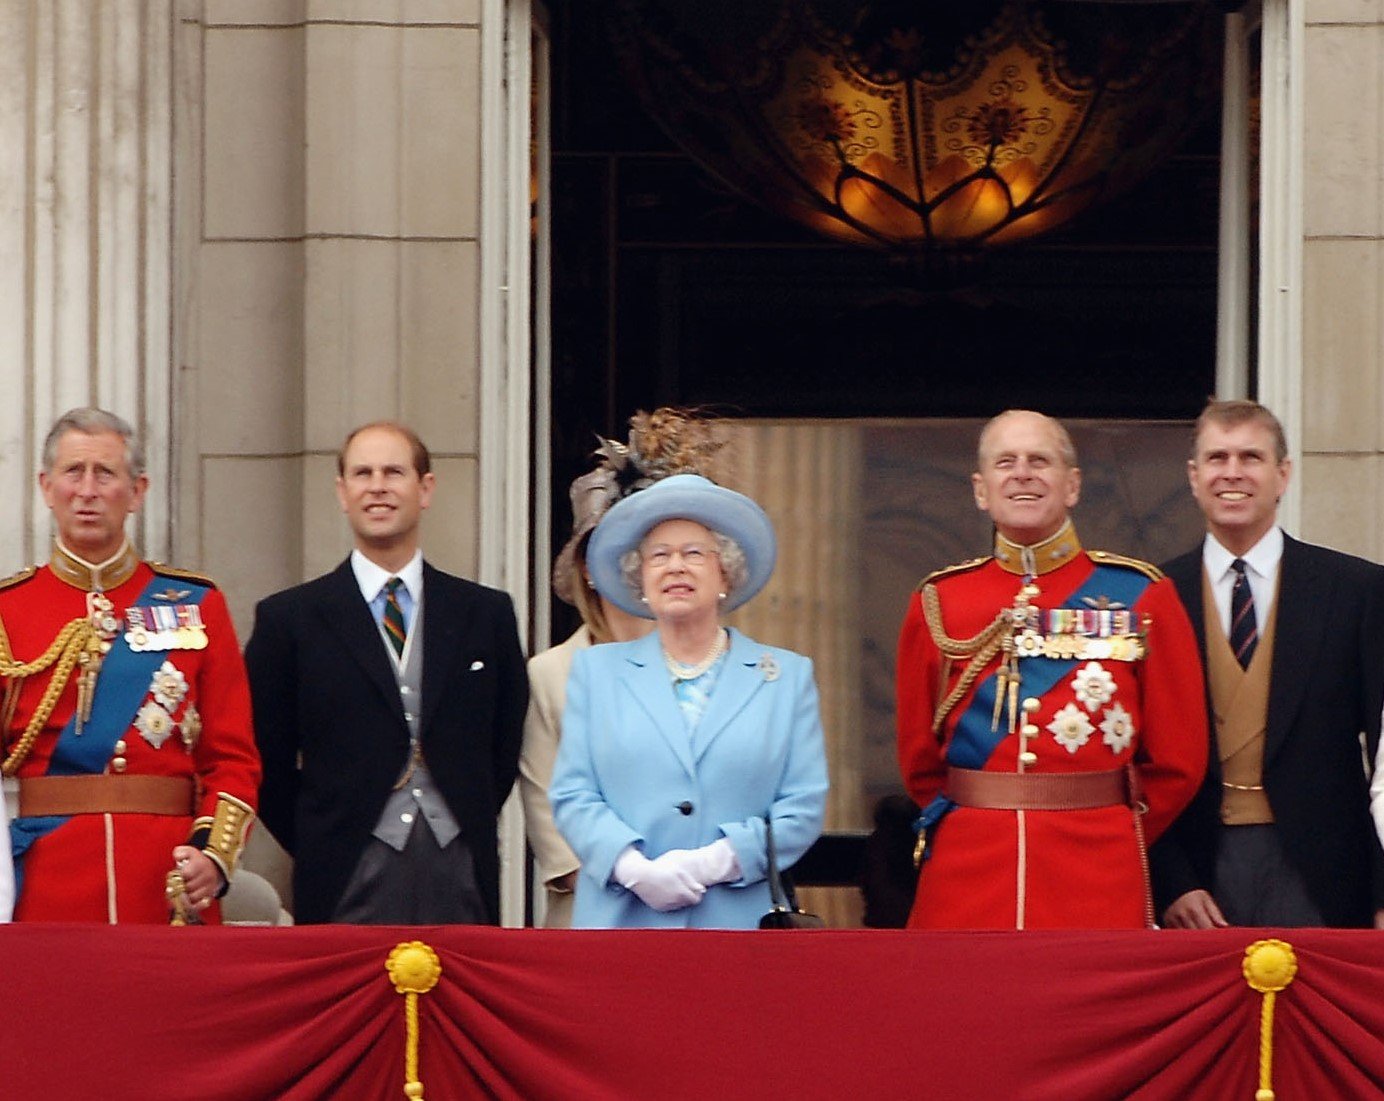 Queen Elizabeth on Buckingham Palace balcony with her husband Prince Philip and their sons Prince Charles, Prince Edward, and Prince Andrew